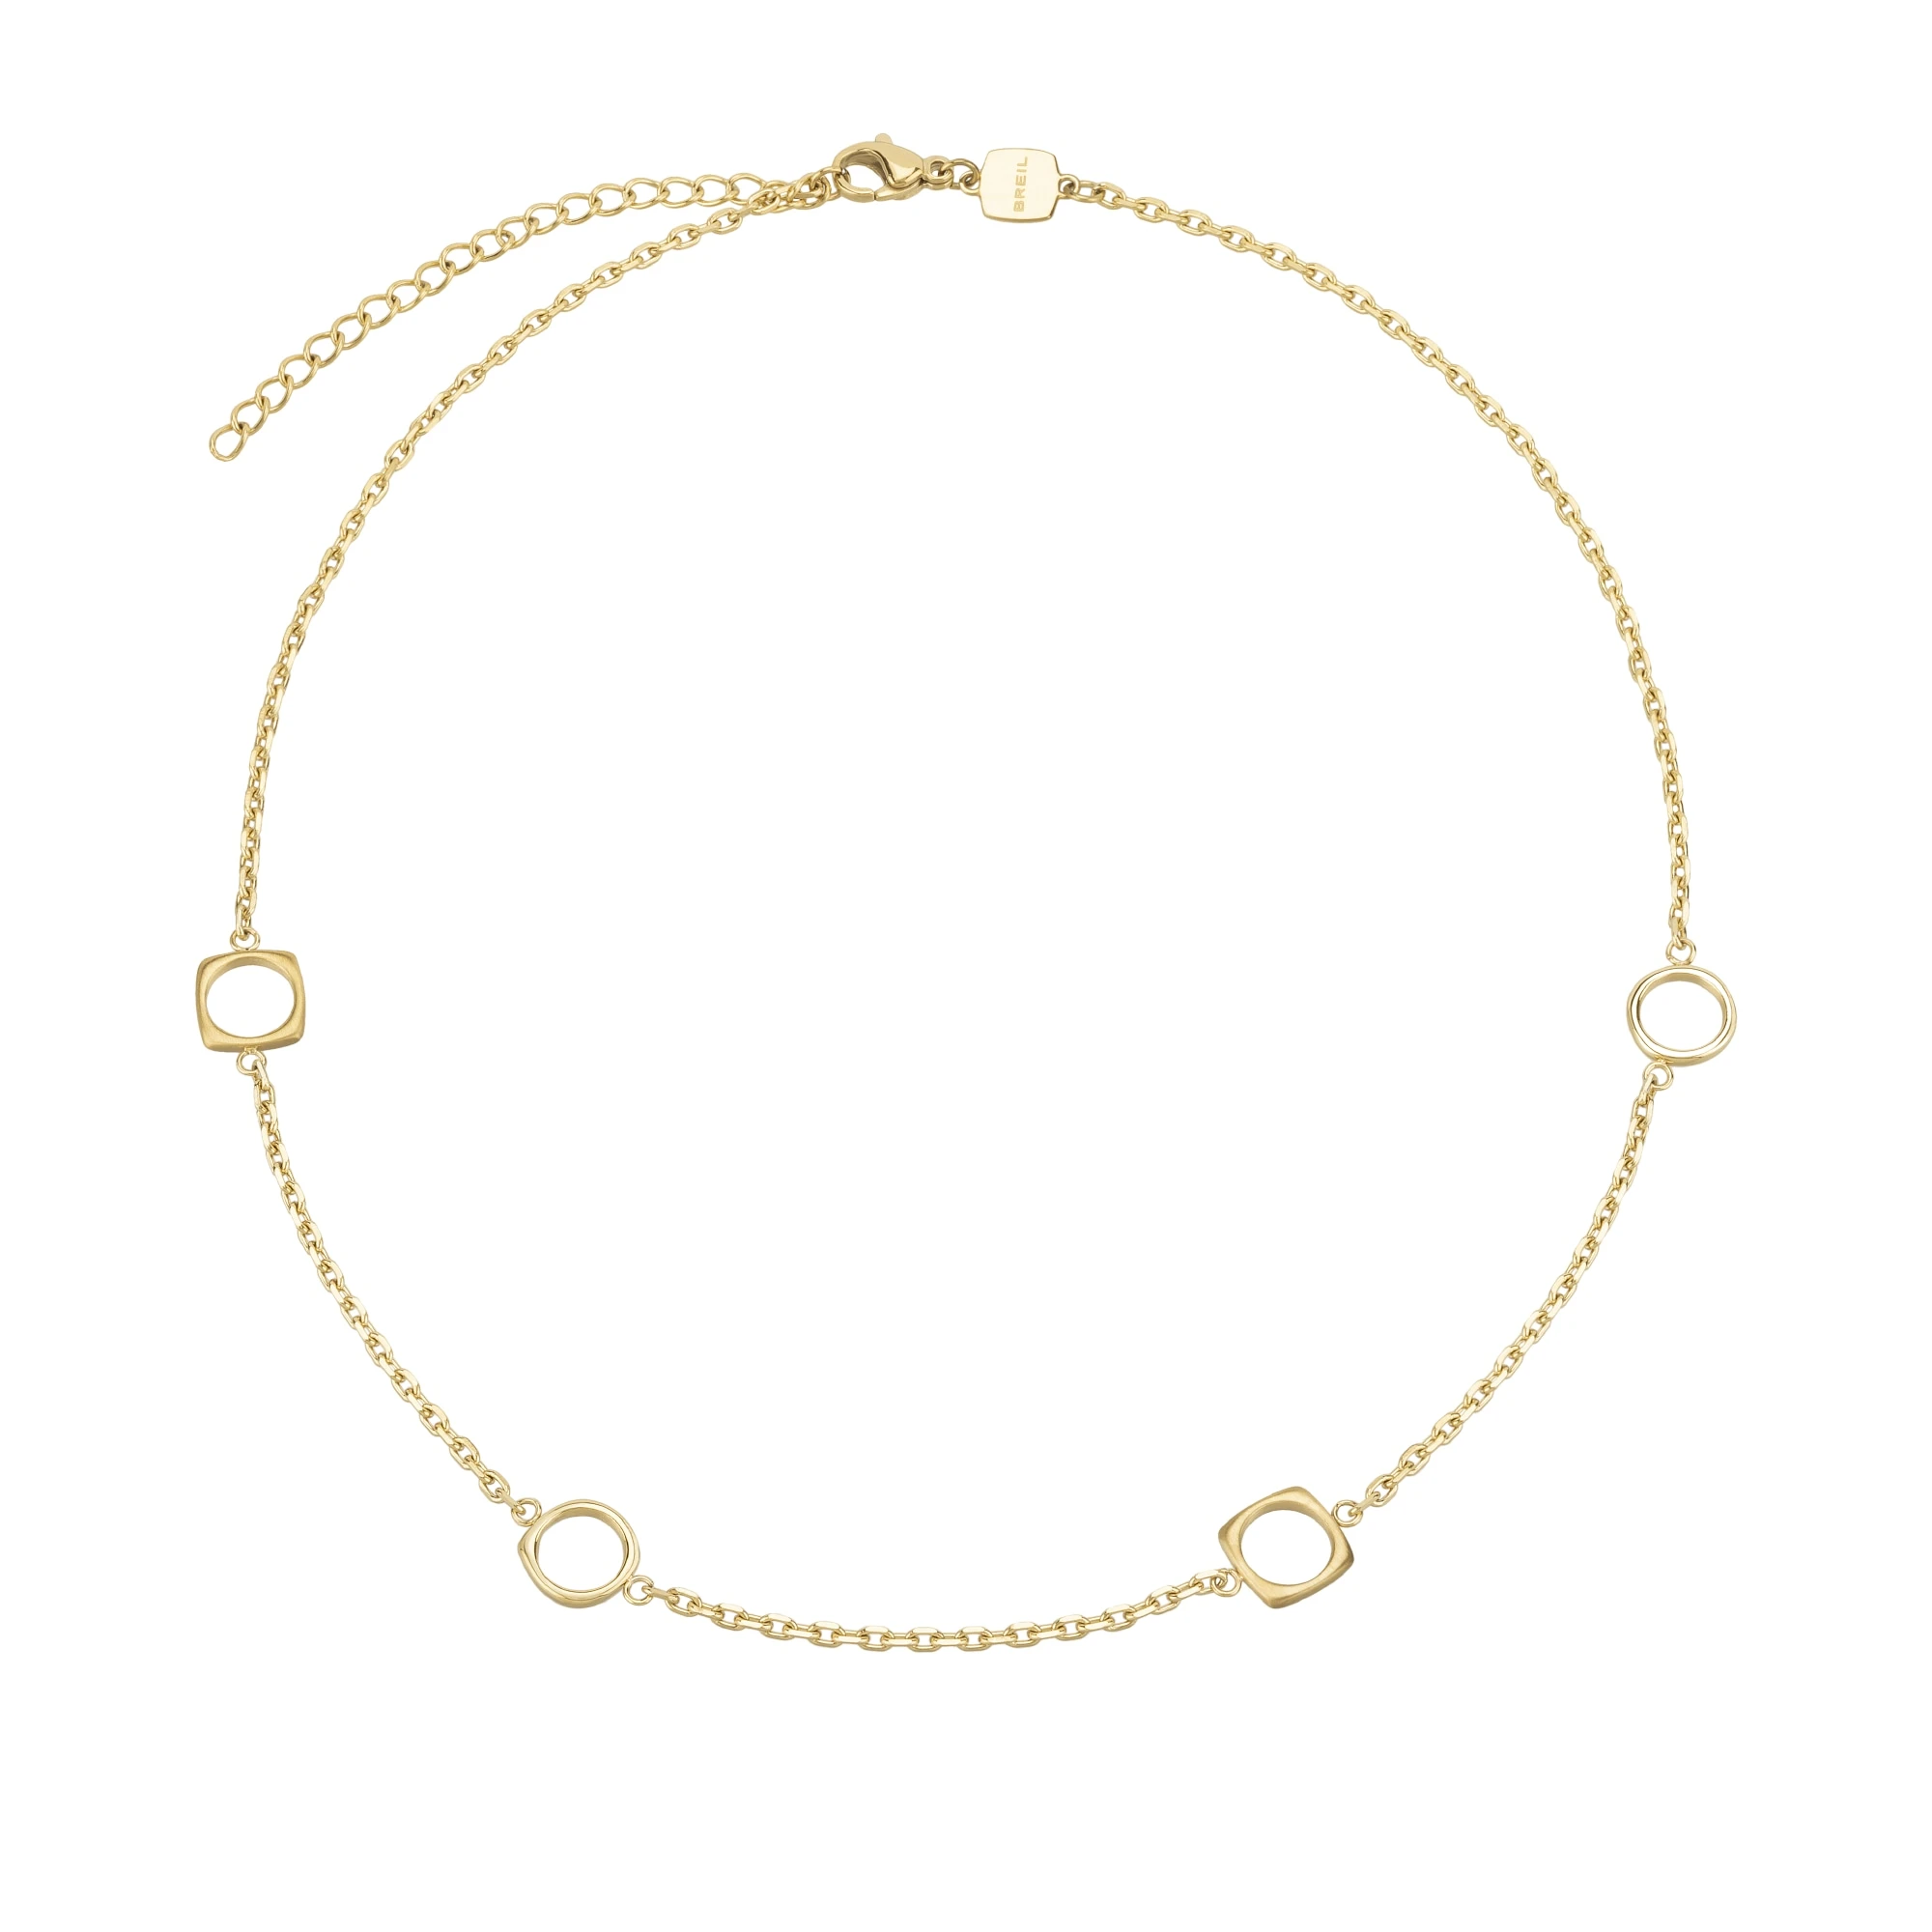 NEW TETRA - IP GOLD STEEL NECKLACE WITH MICRO-CHAIN - 1 - TJ3168 | Breil